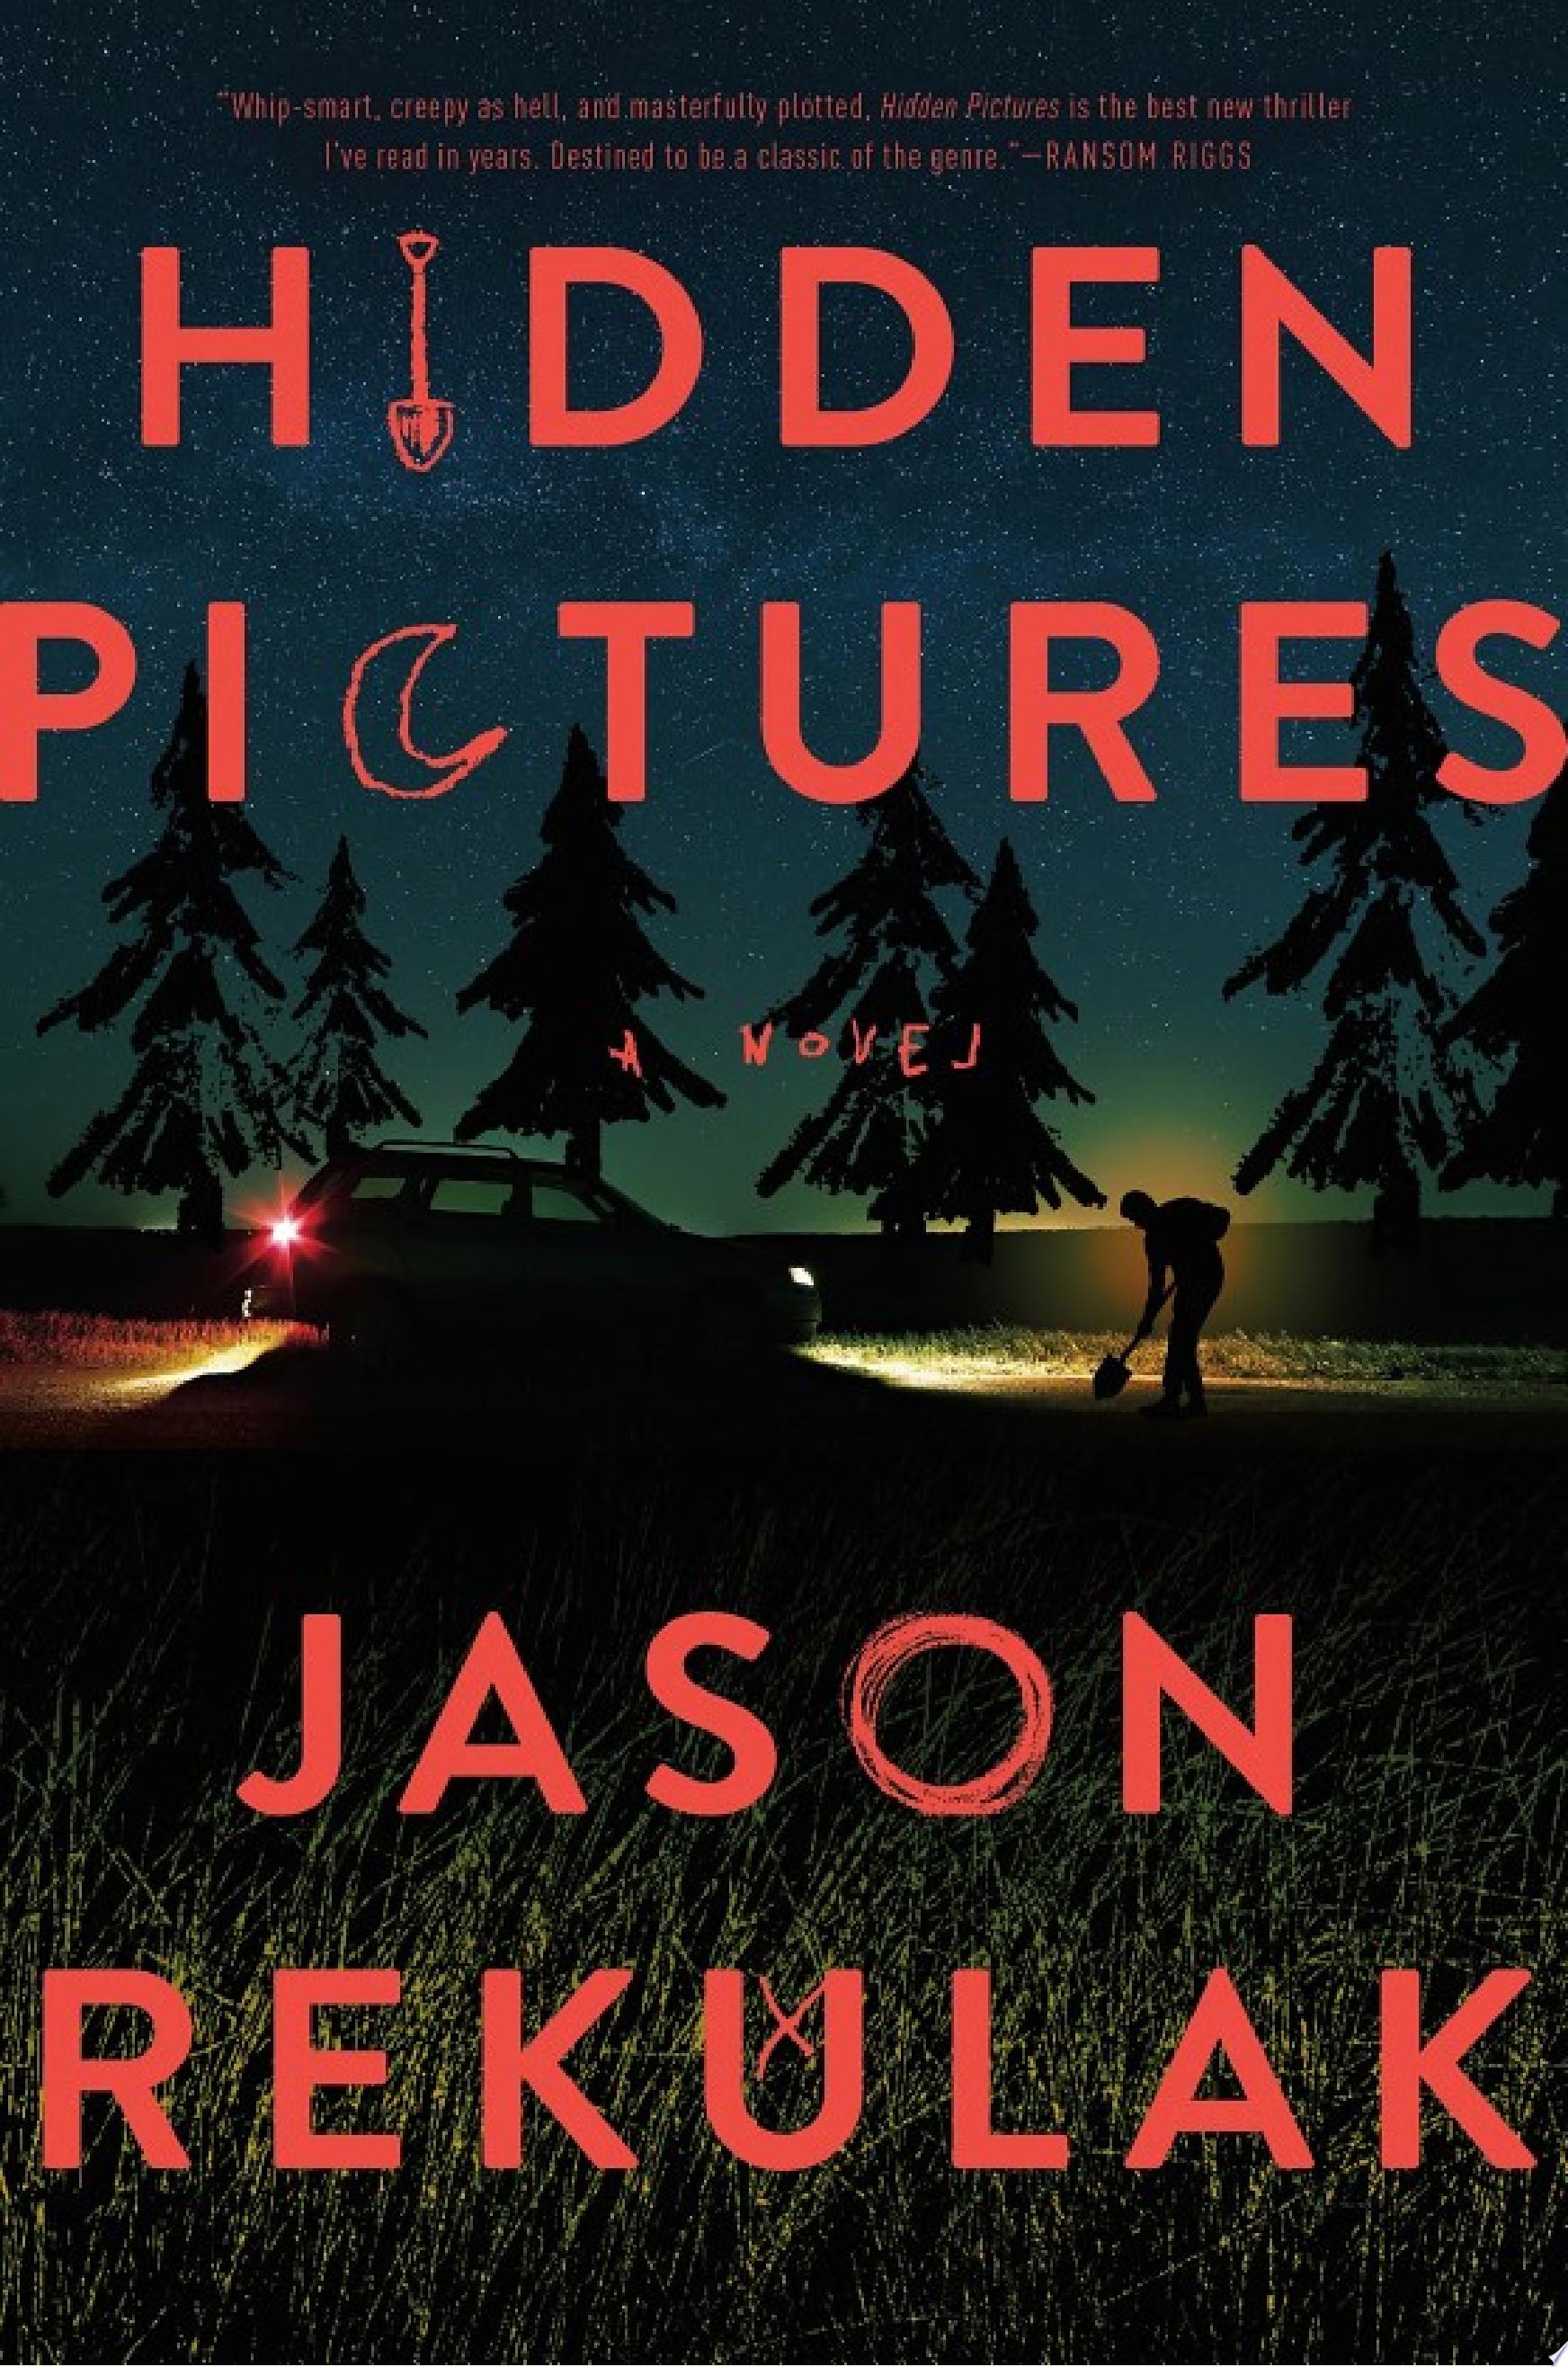 Image for "Hidden Pictures"